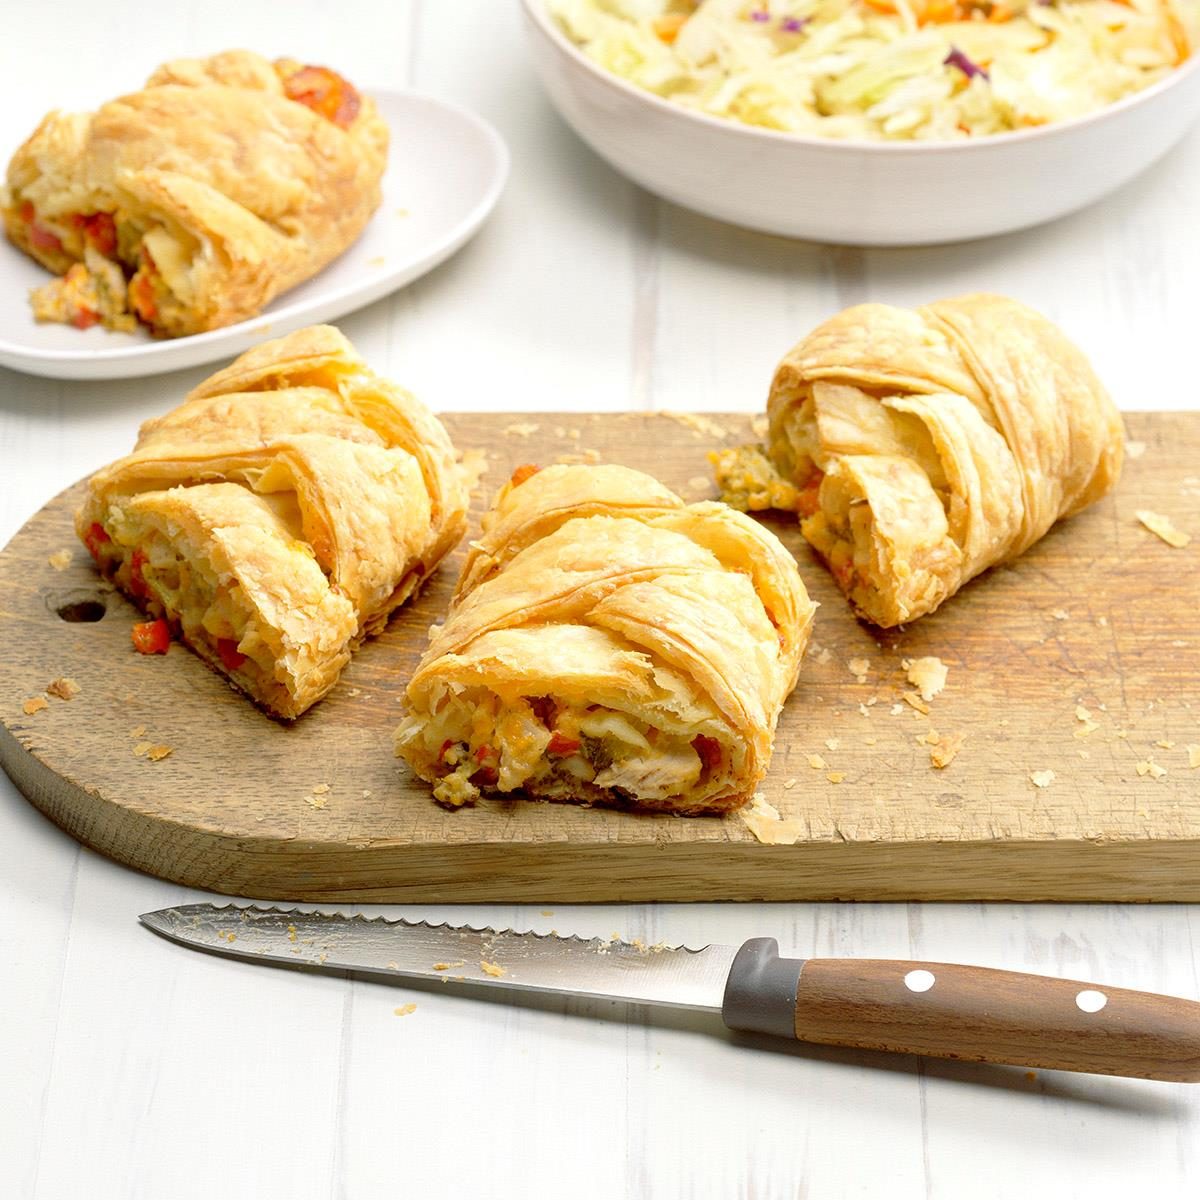 <p>This meal in one is an easy way to get kids—and adults—to eat broccoli. The puff pastry that wraps up turkey, cheese and veggies is pure, flaky goodness. —Jenelle Fender, Steinbach, Manitoba</p> <div class="listicle-page__buttons"> <div class="listicle-page__cta-button"><a href='https://www.tasteofhome.com/recipes/turkey-and-broccoli-pastry-braid/'>Go to Recipe</a></div> </div>